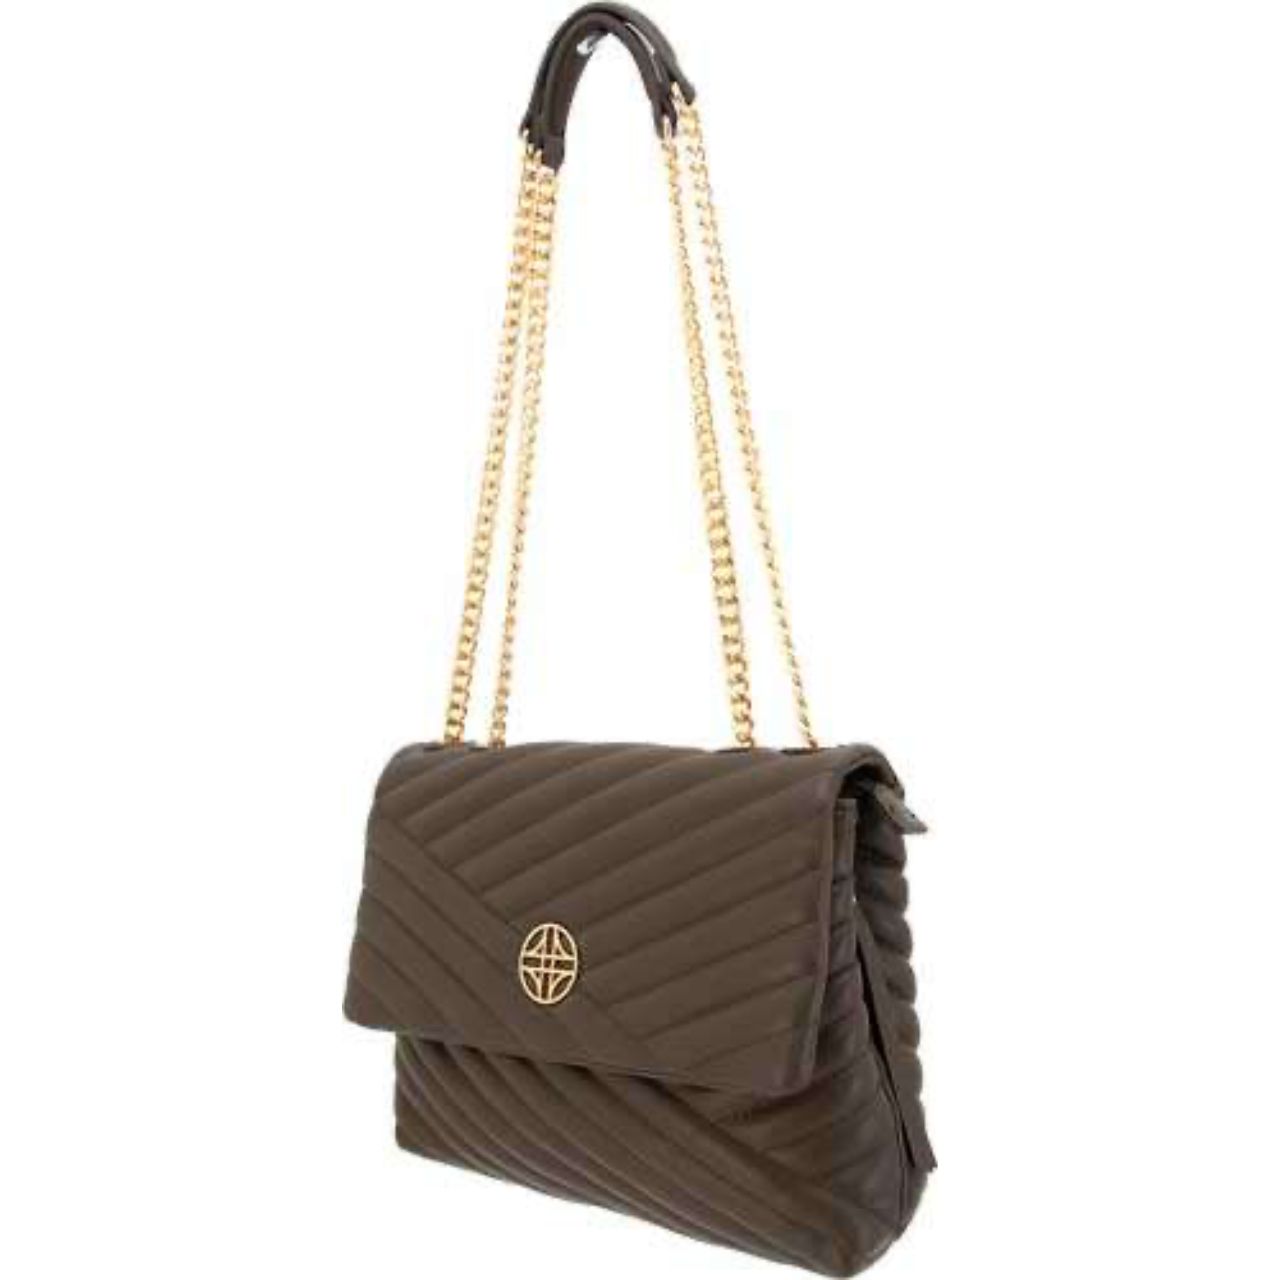 brown concealed carry purse with chain strap